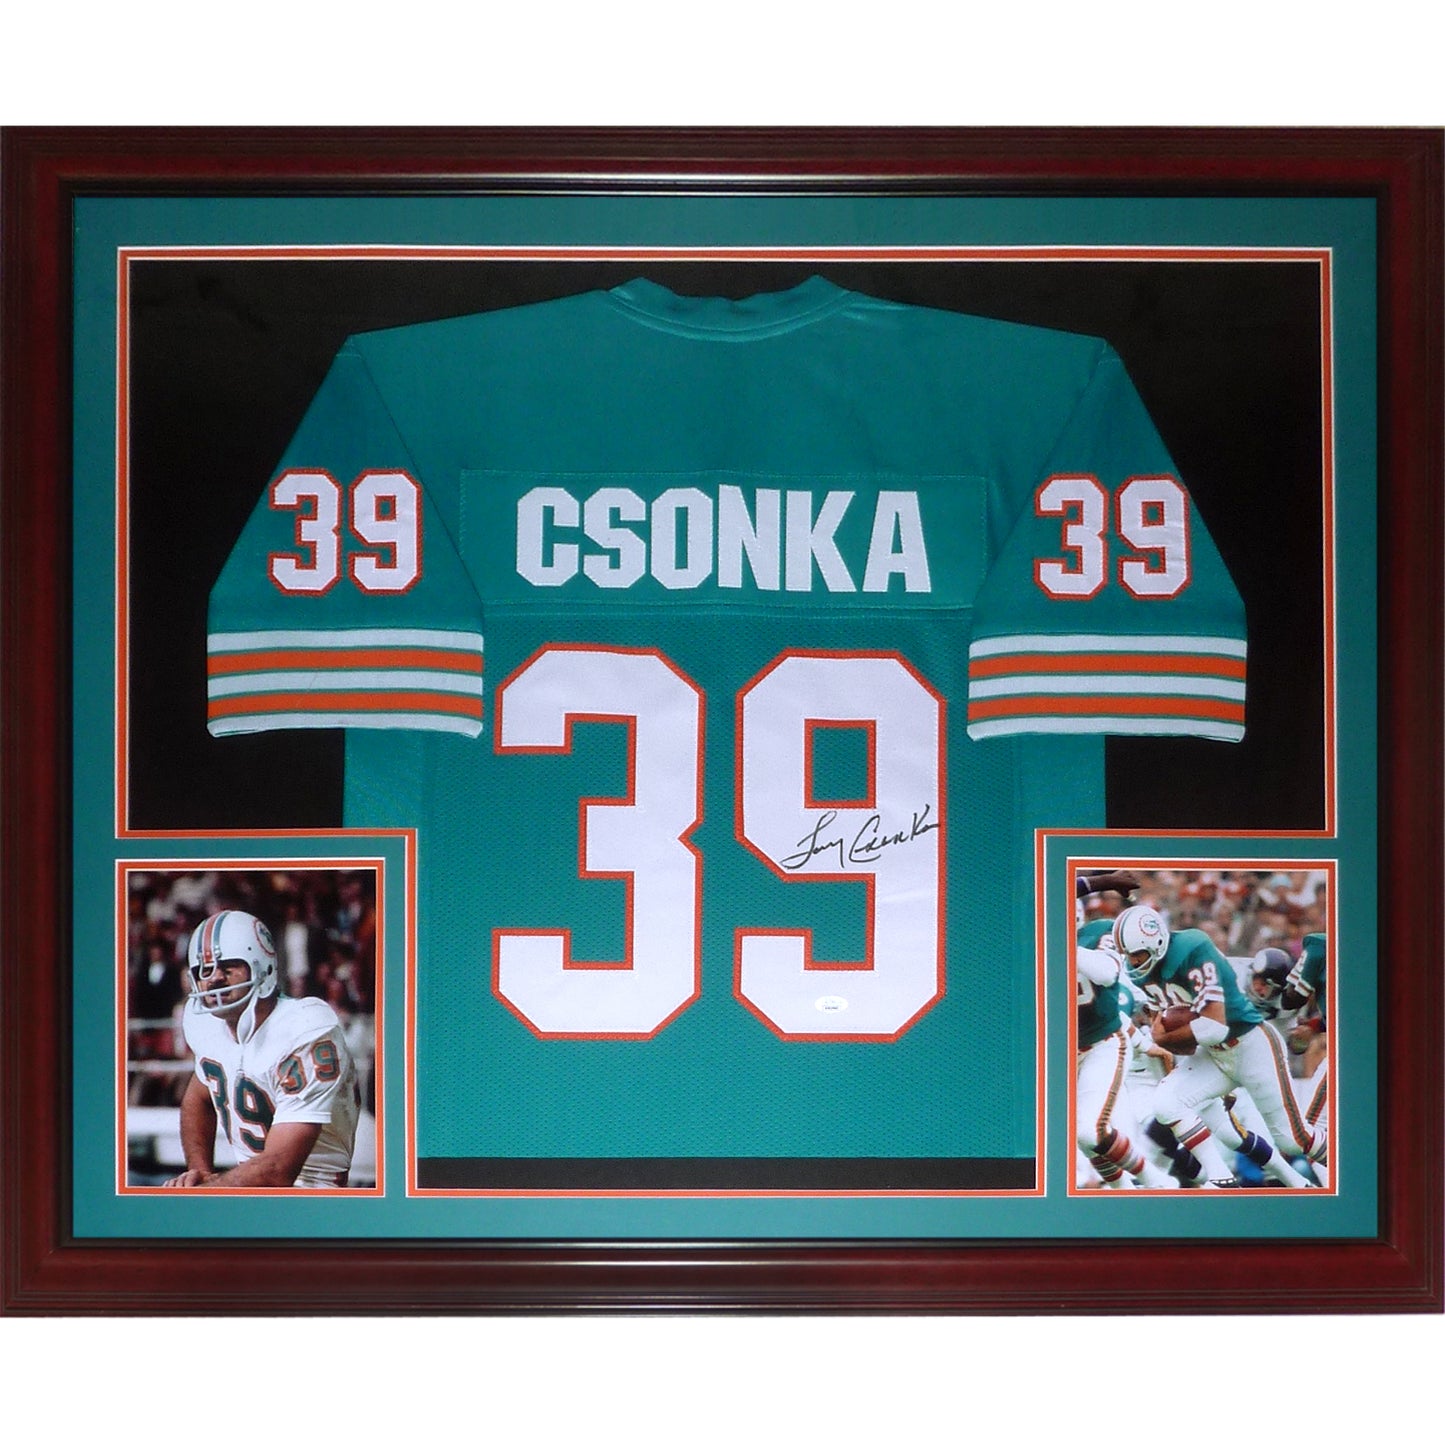 Larry Csonka Autographed Miami Dolphins (Teal #39) Deluxe Framed Jersey - JSA